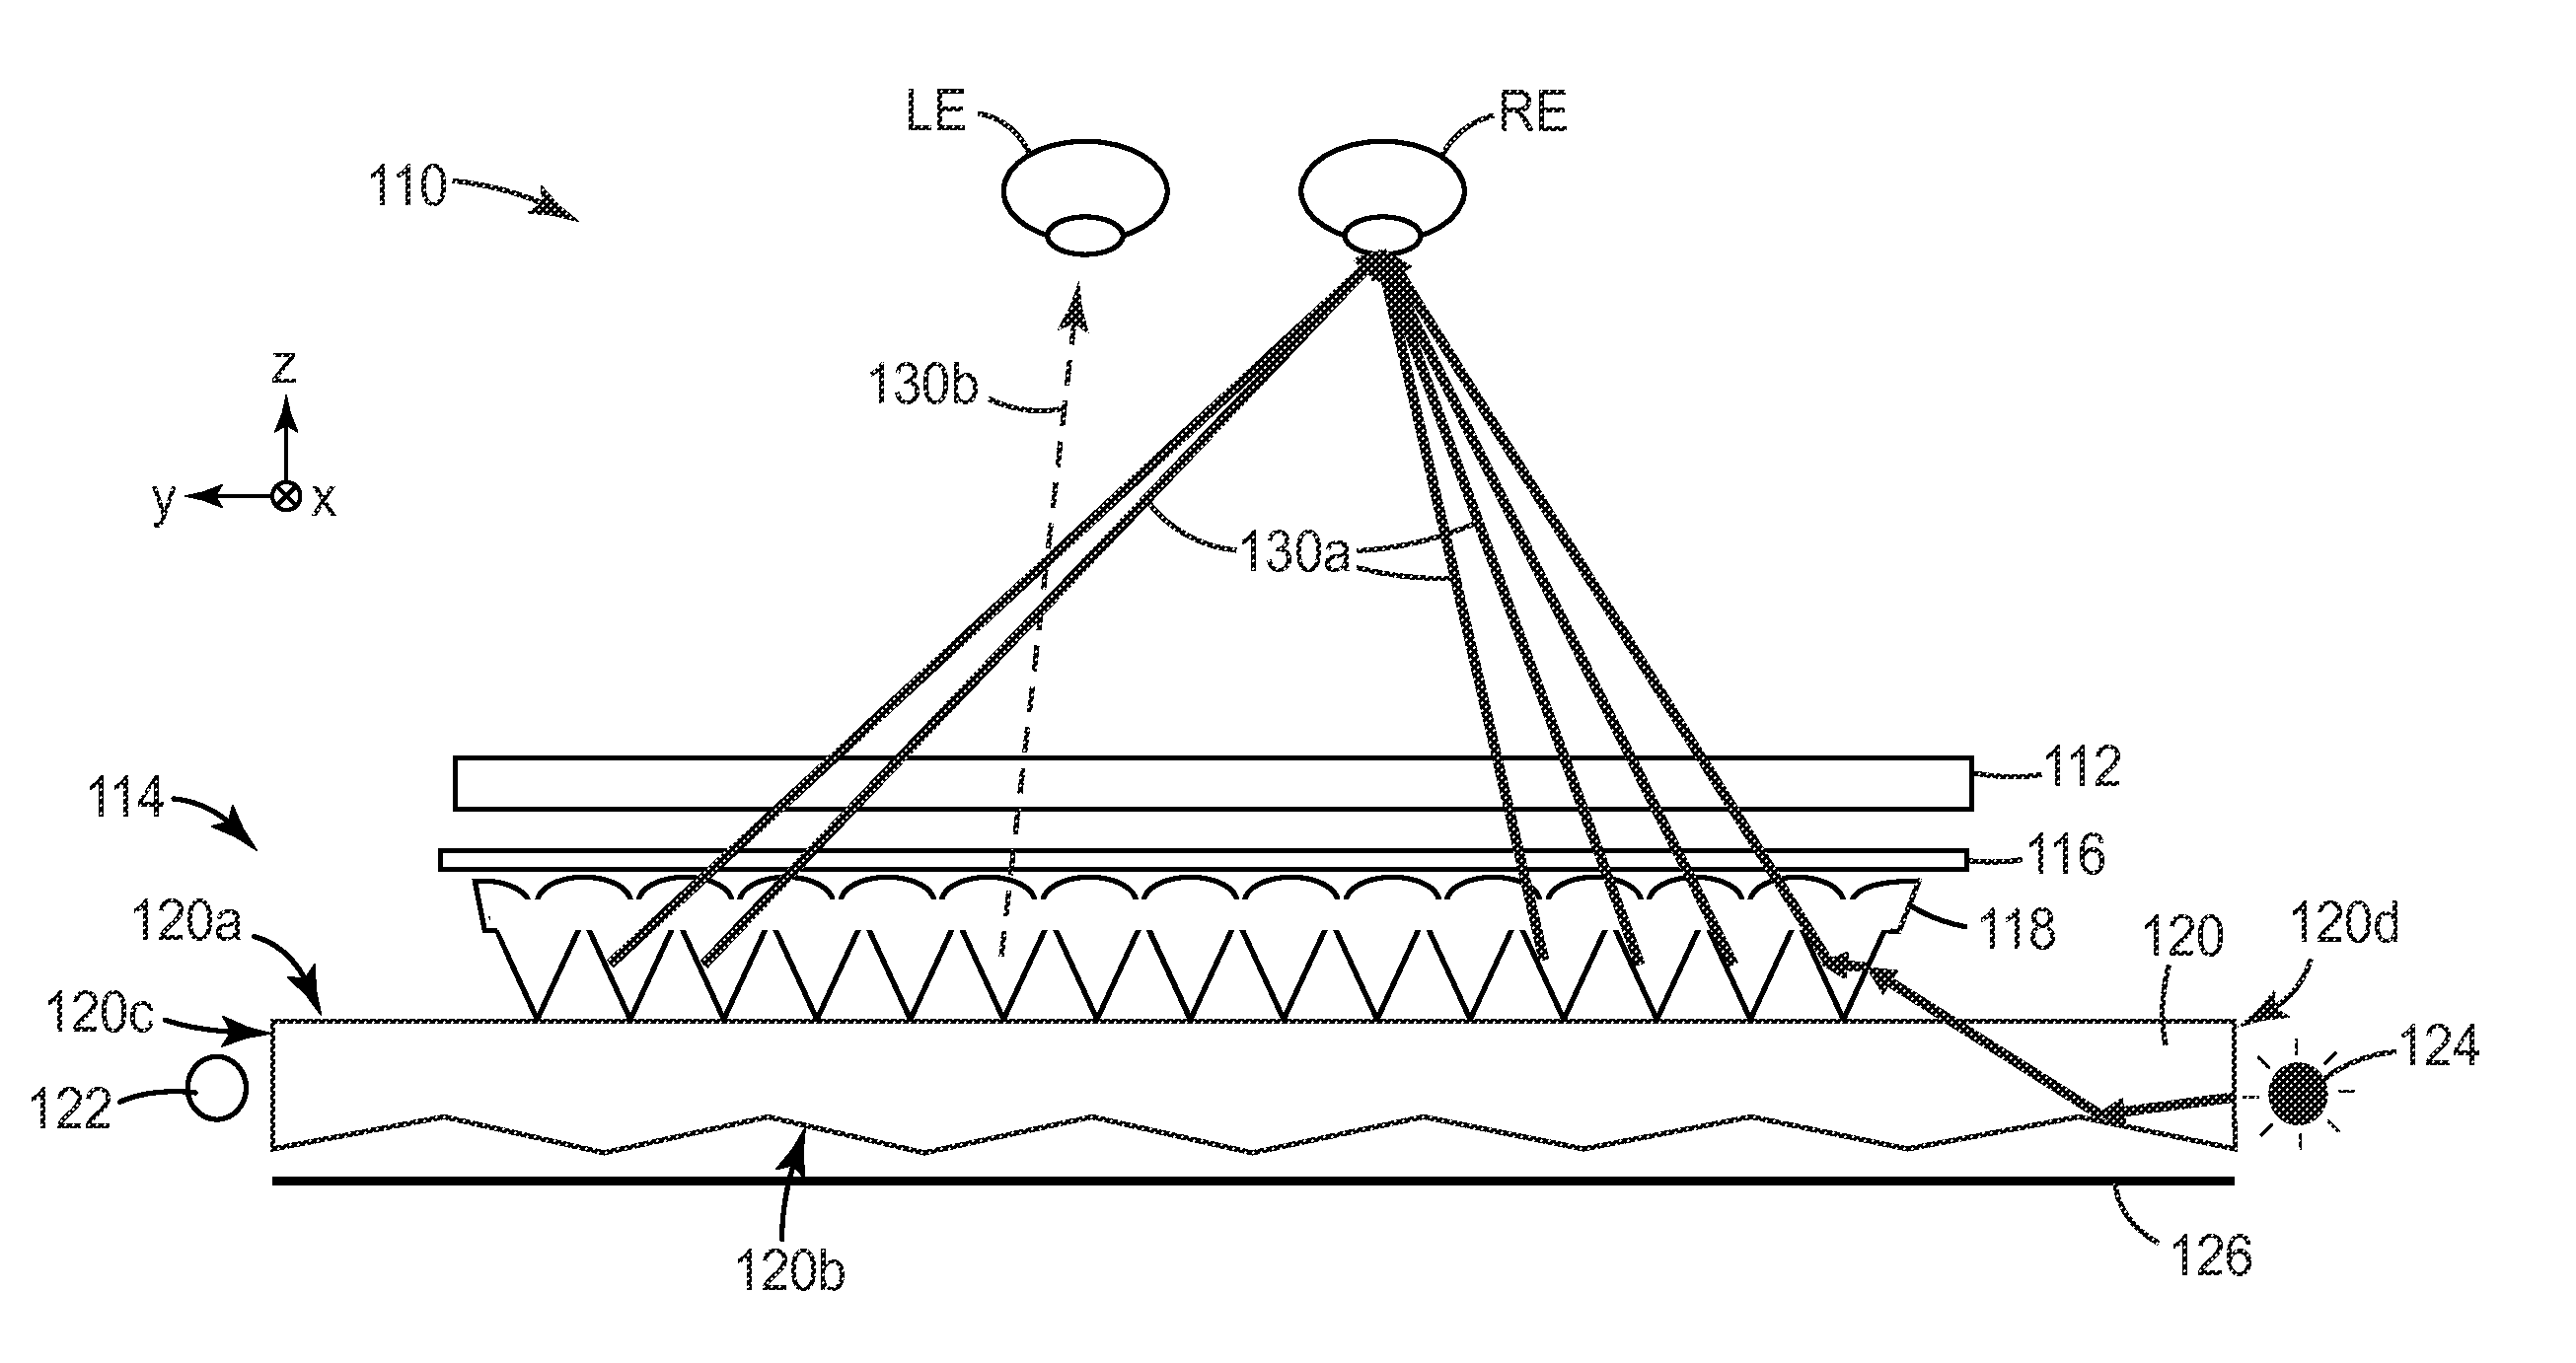 Microreplicated Film for Attachment to Autostereoscopic Display Components